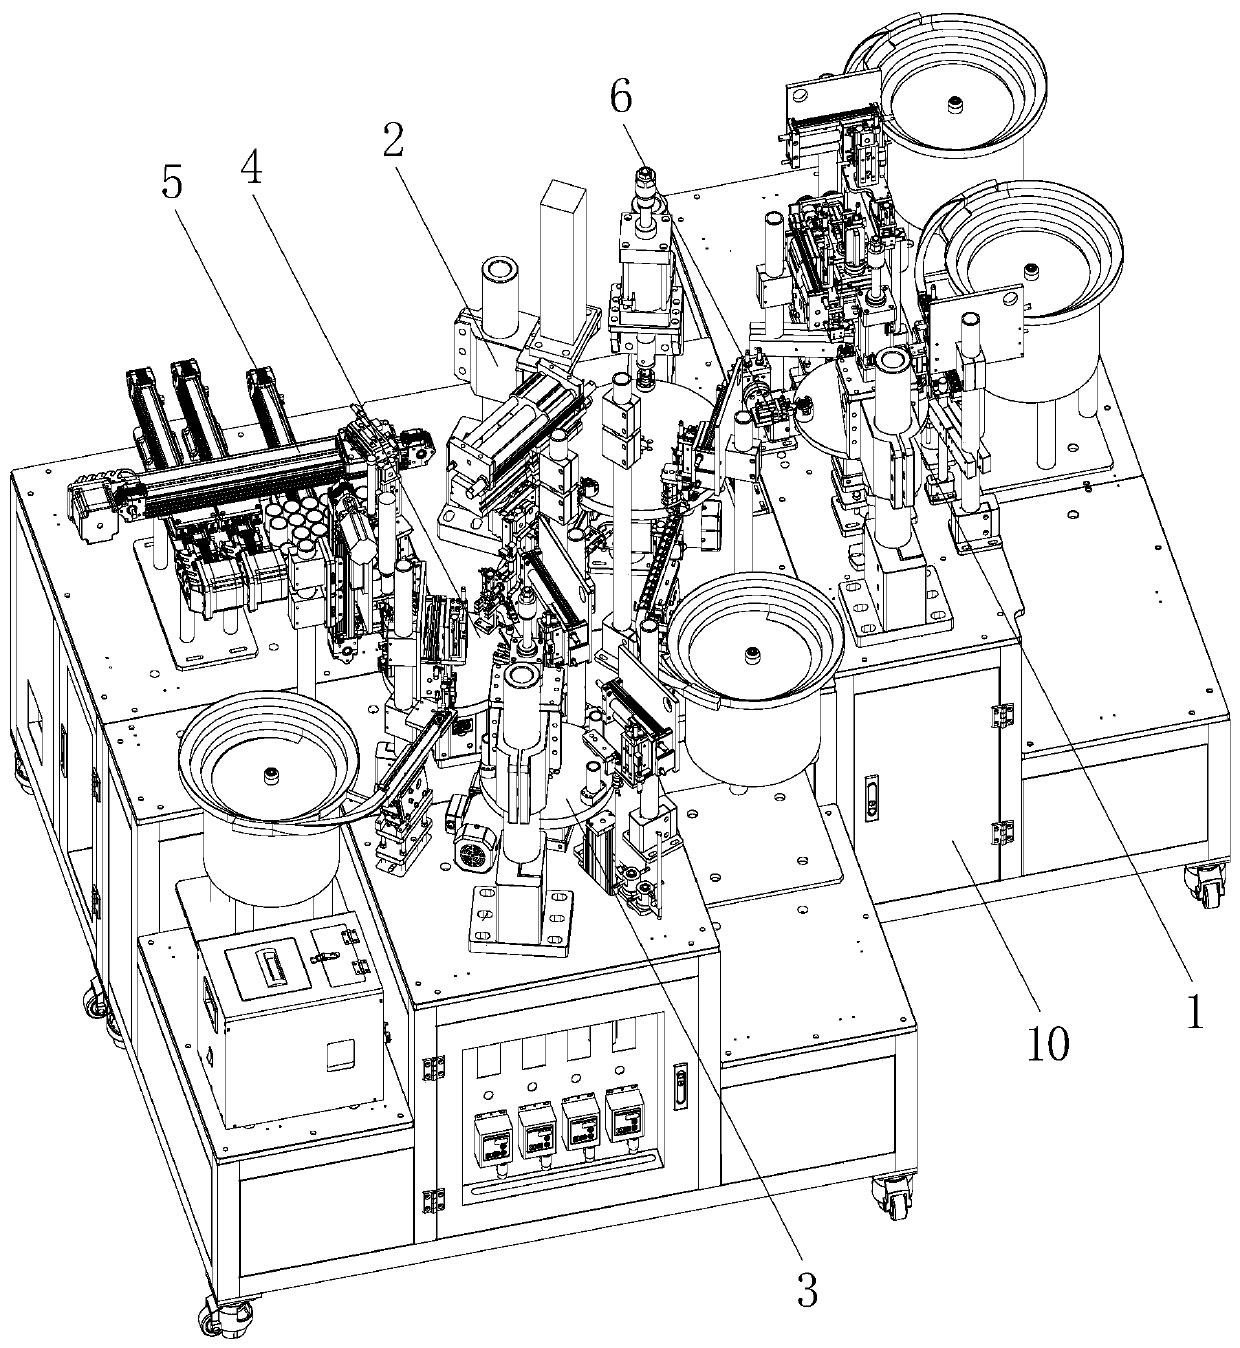 An automatic assembly machine for atomizer rocker arm assembly